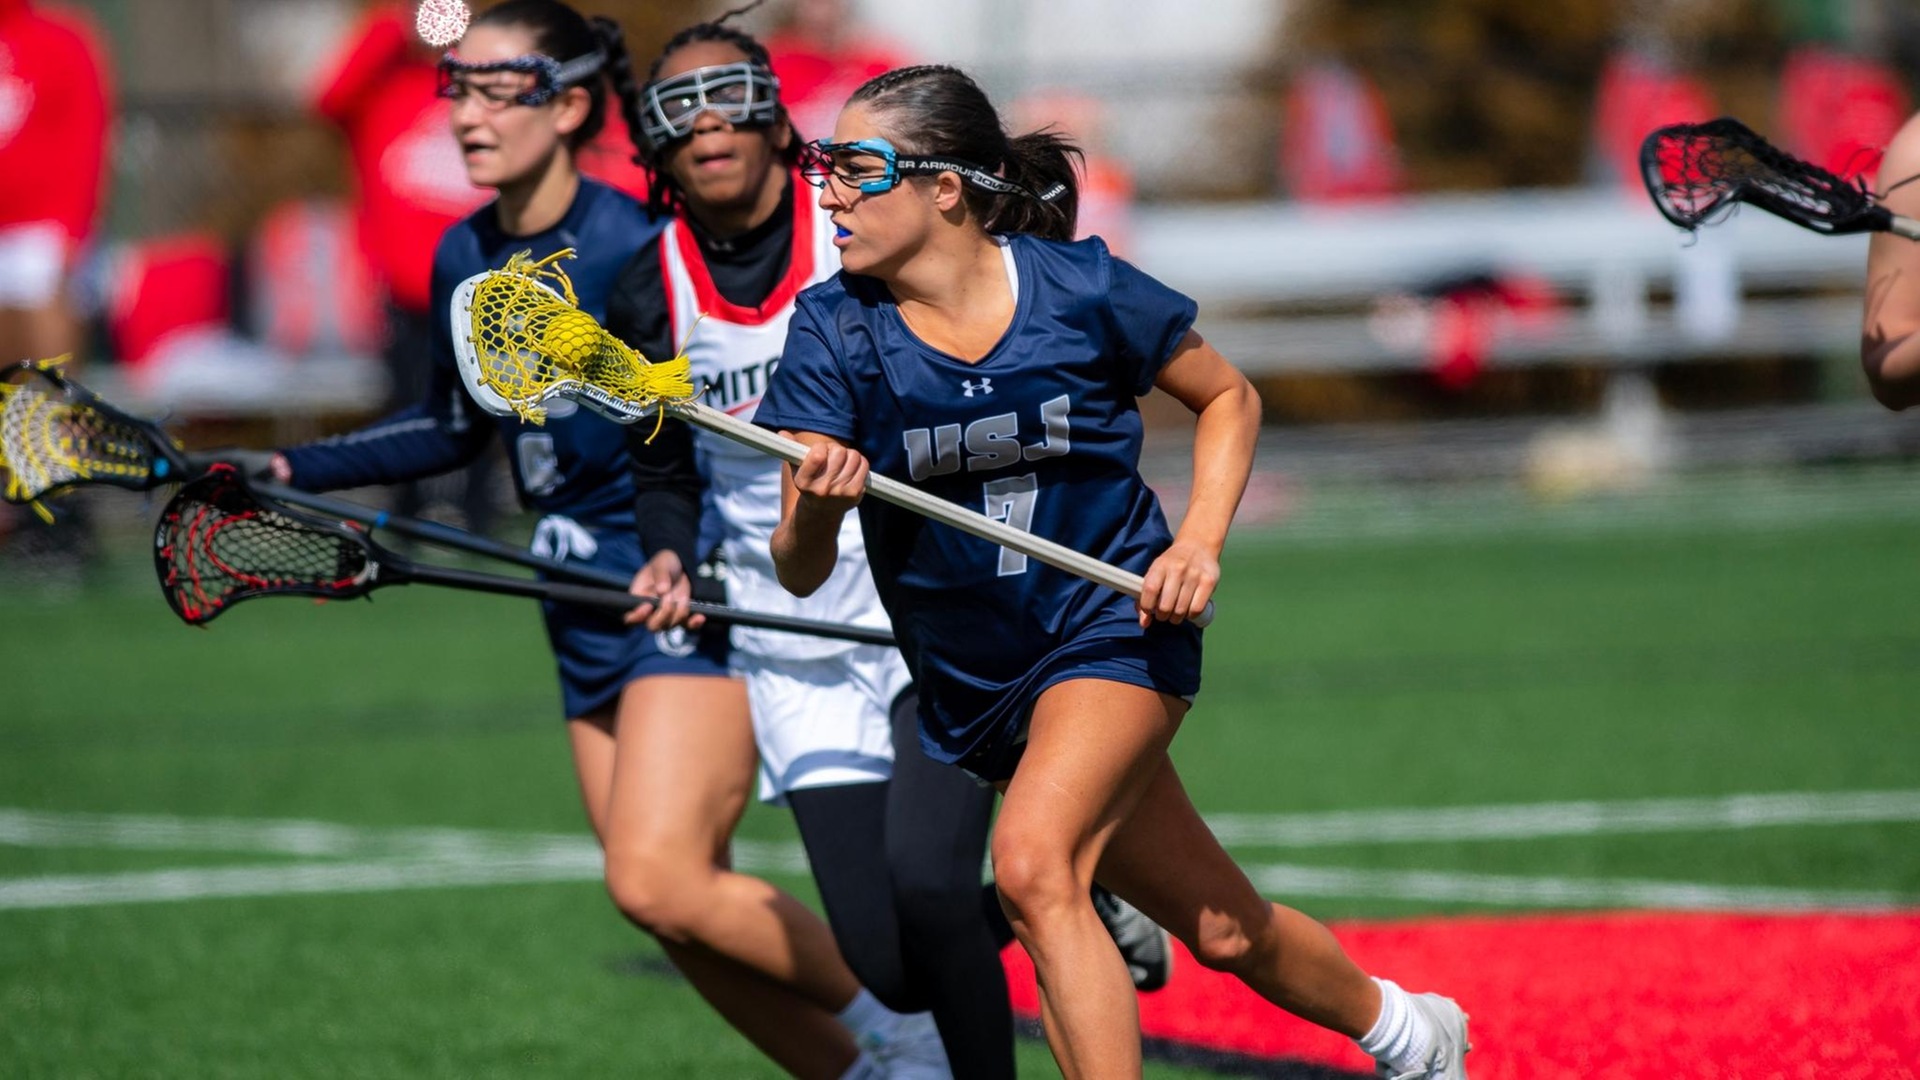 Strong Second Half Lifts Women's Lacrosse Over Dean Wednesday, 15-7